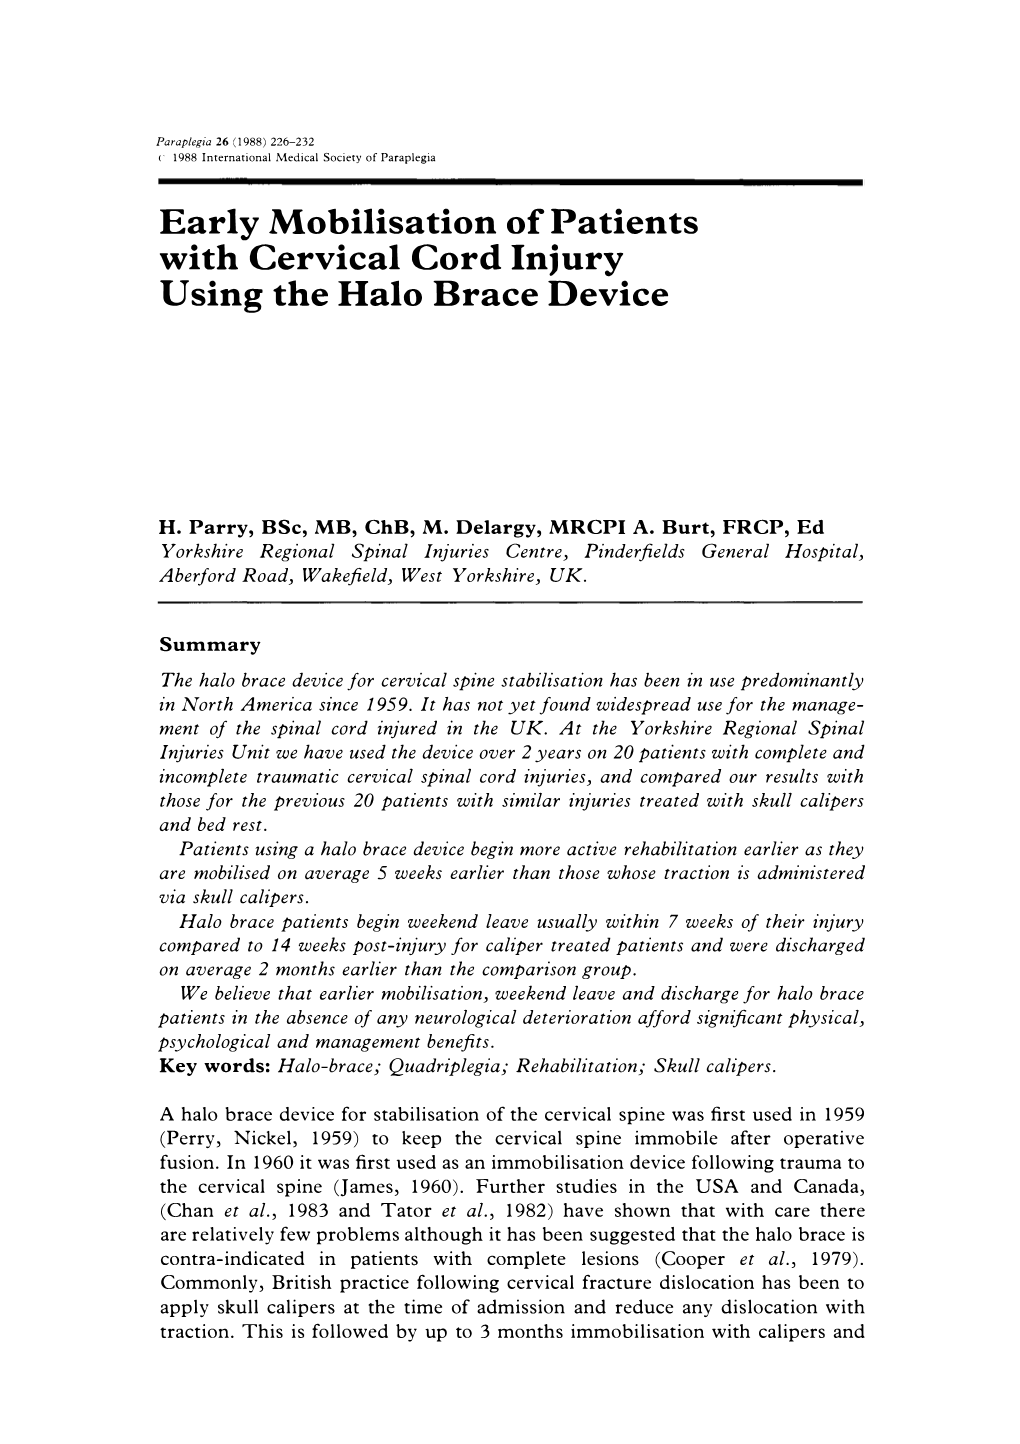 Early Mobilisation of Patients with Cervical Cord Injury Using the Halo Brace Device